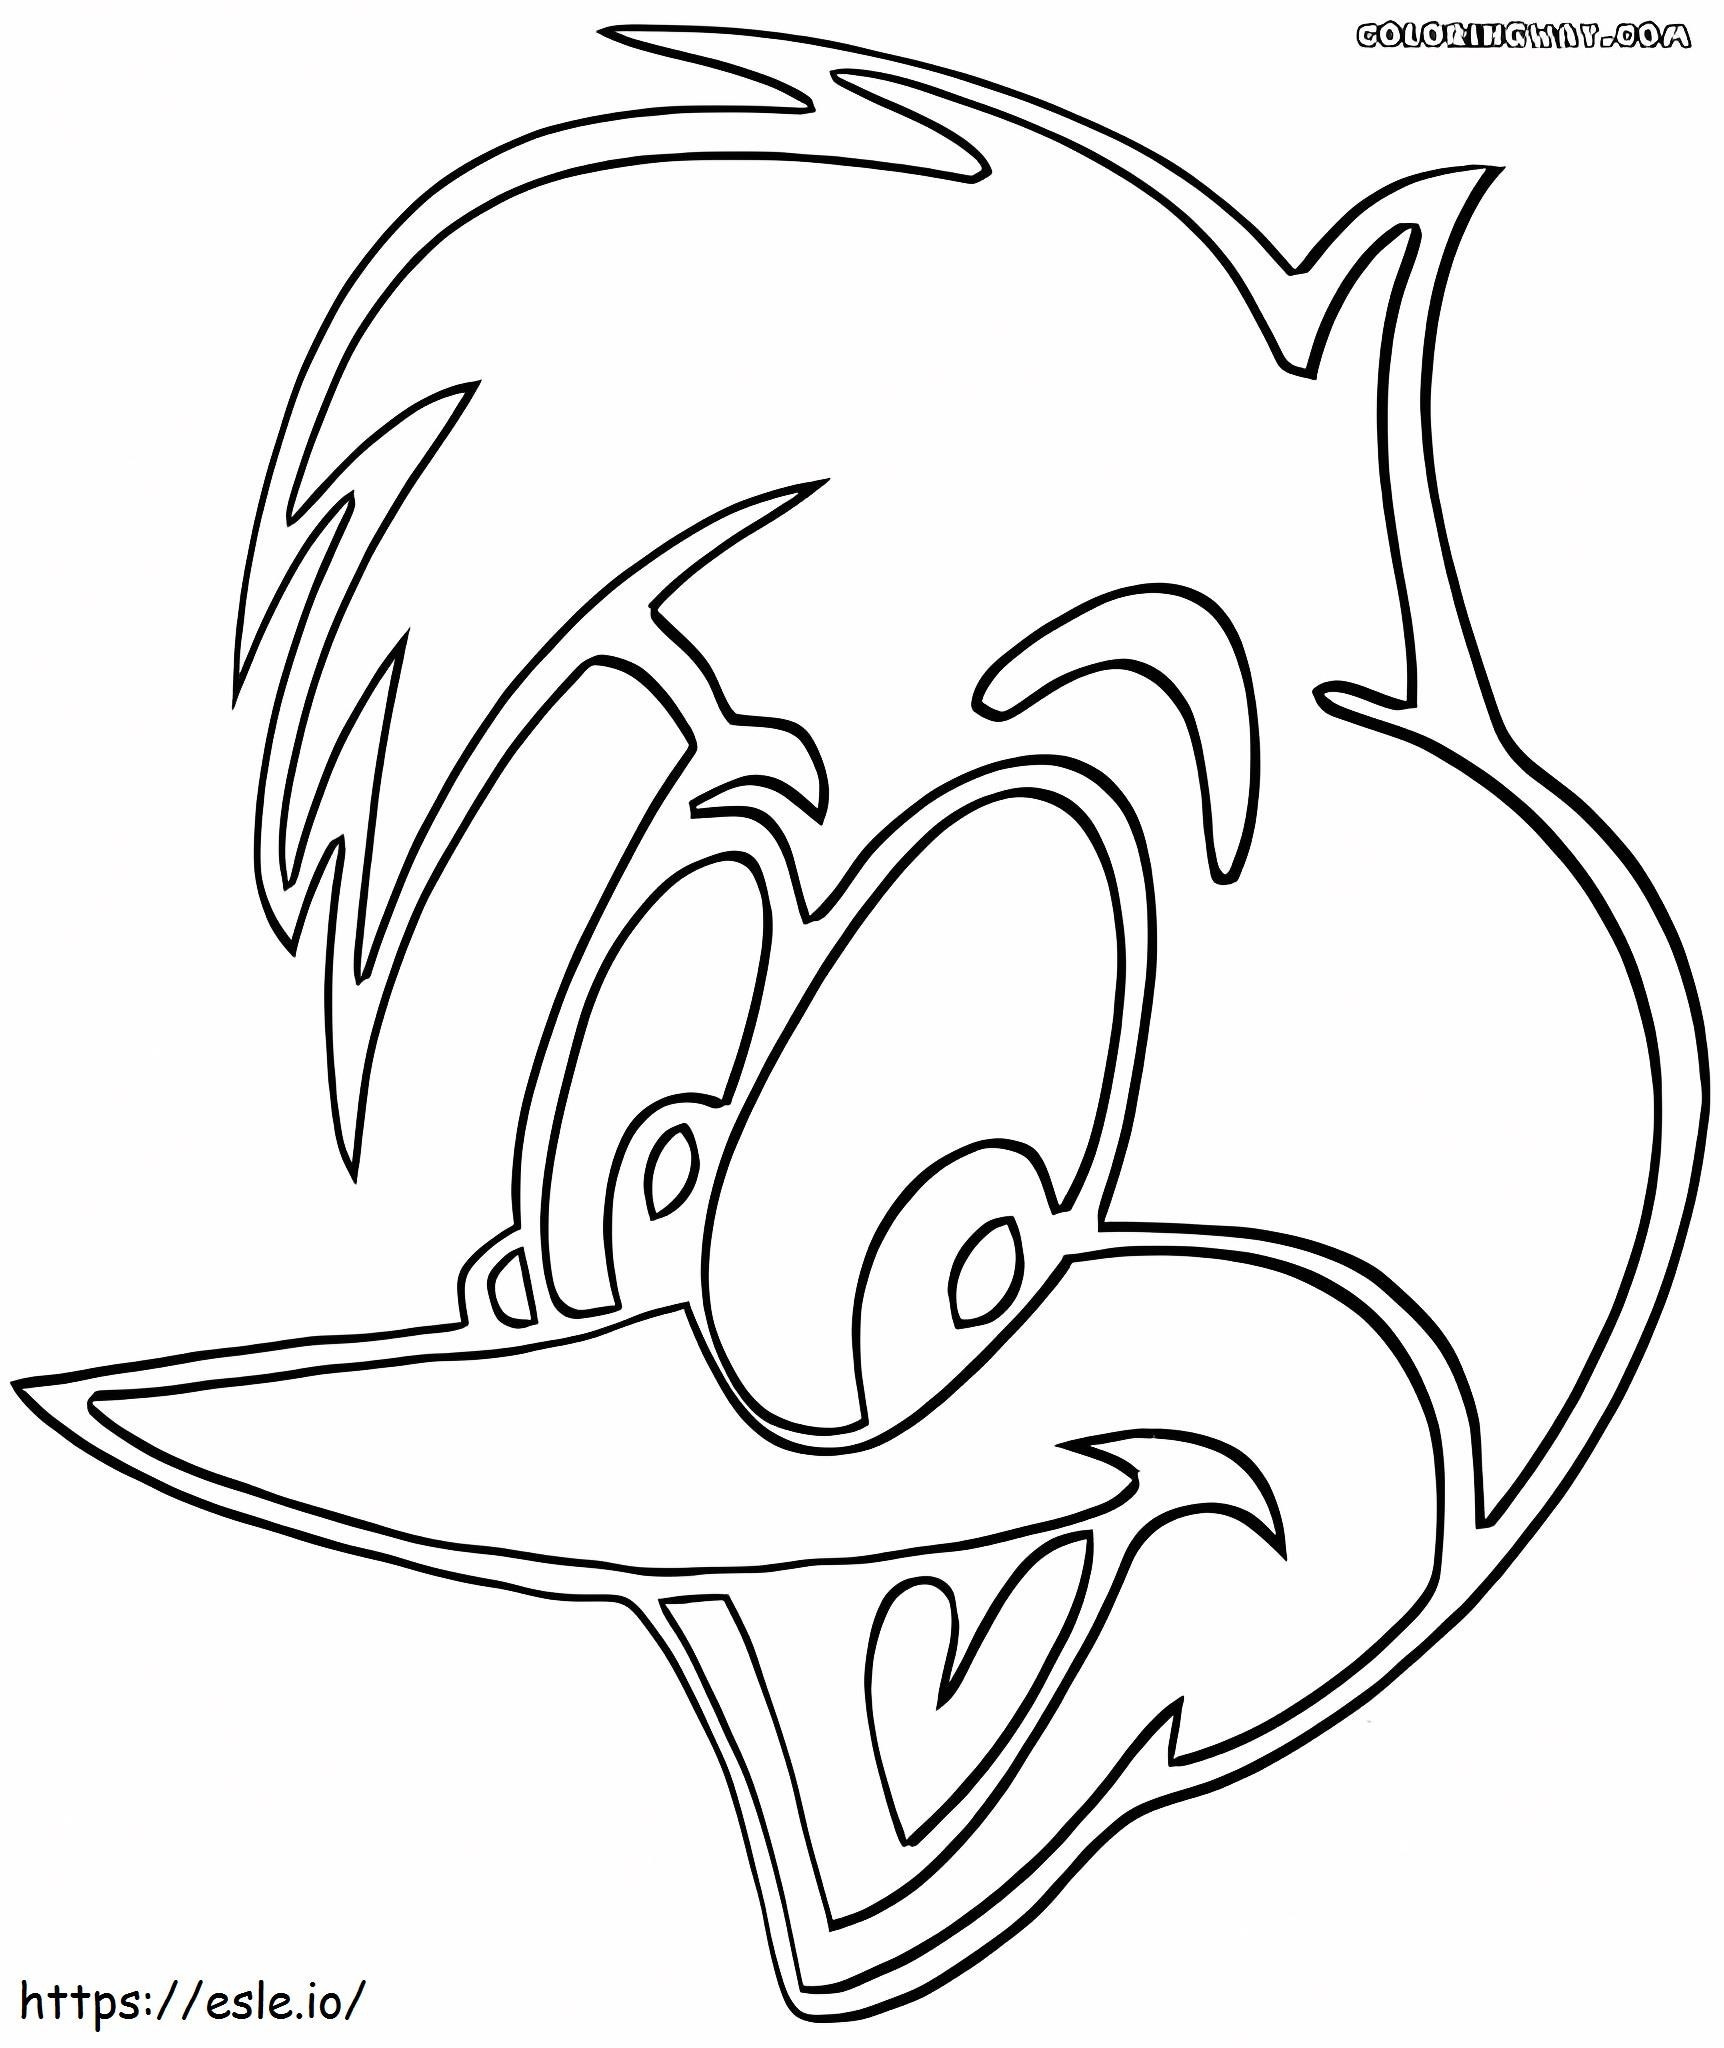 Woody Woodpecker coloring page